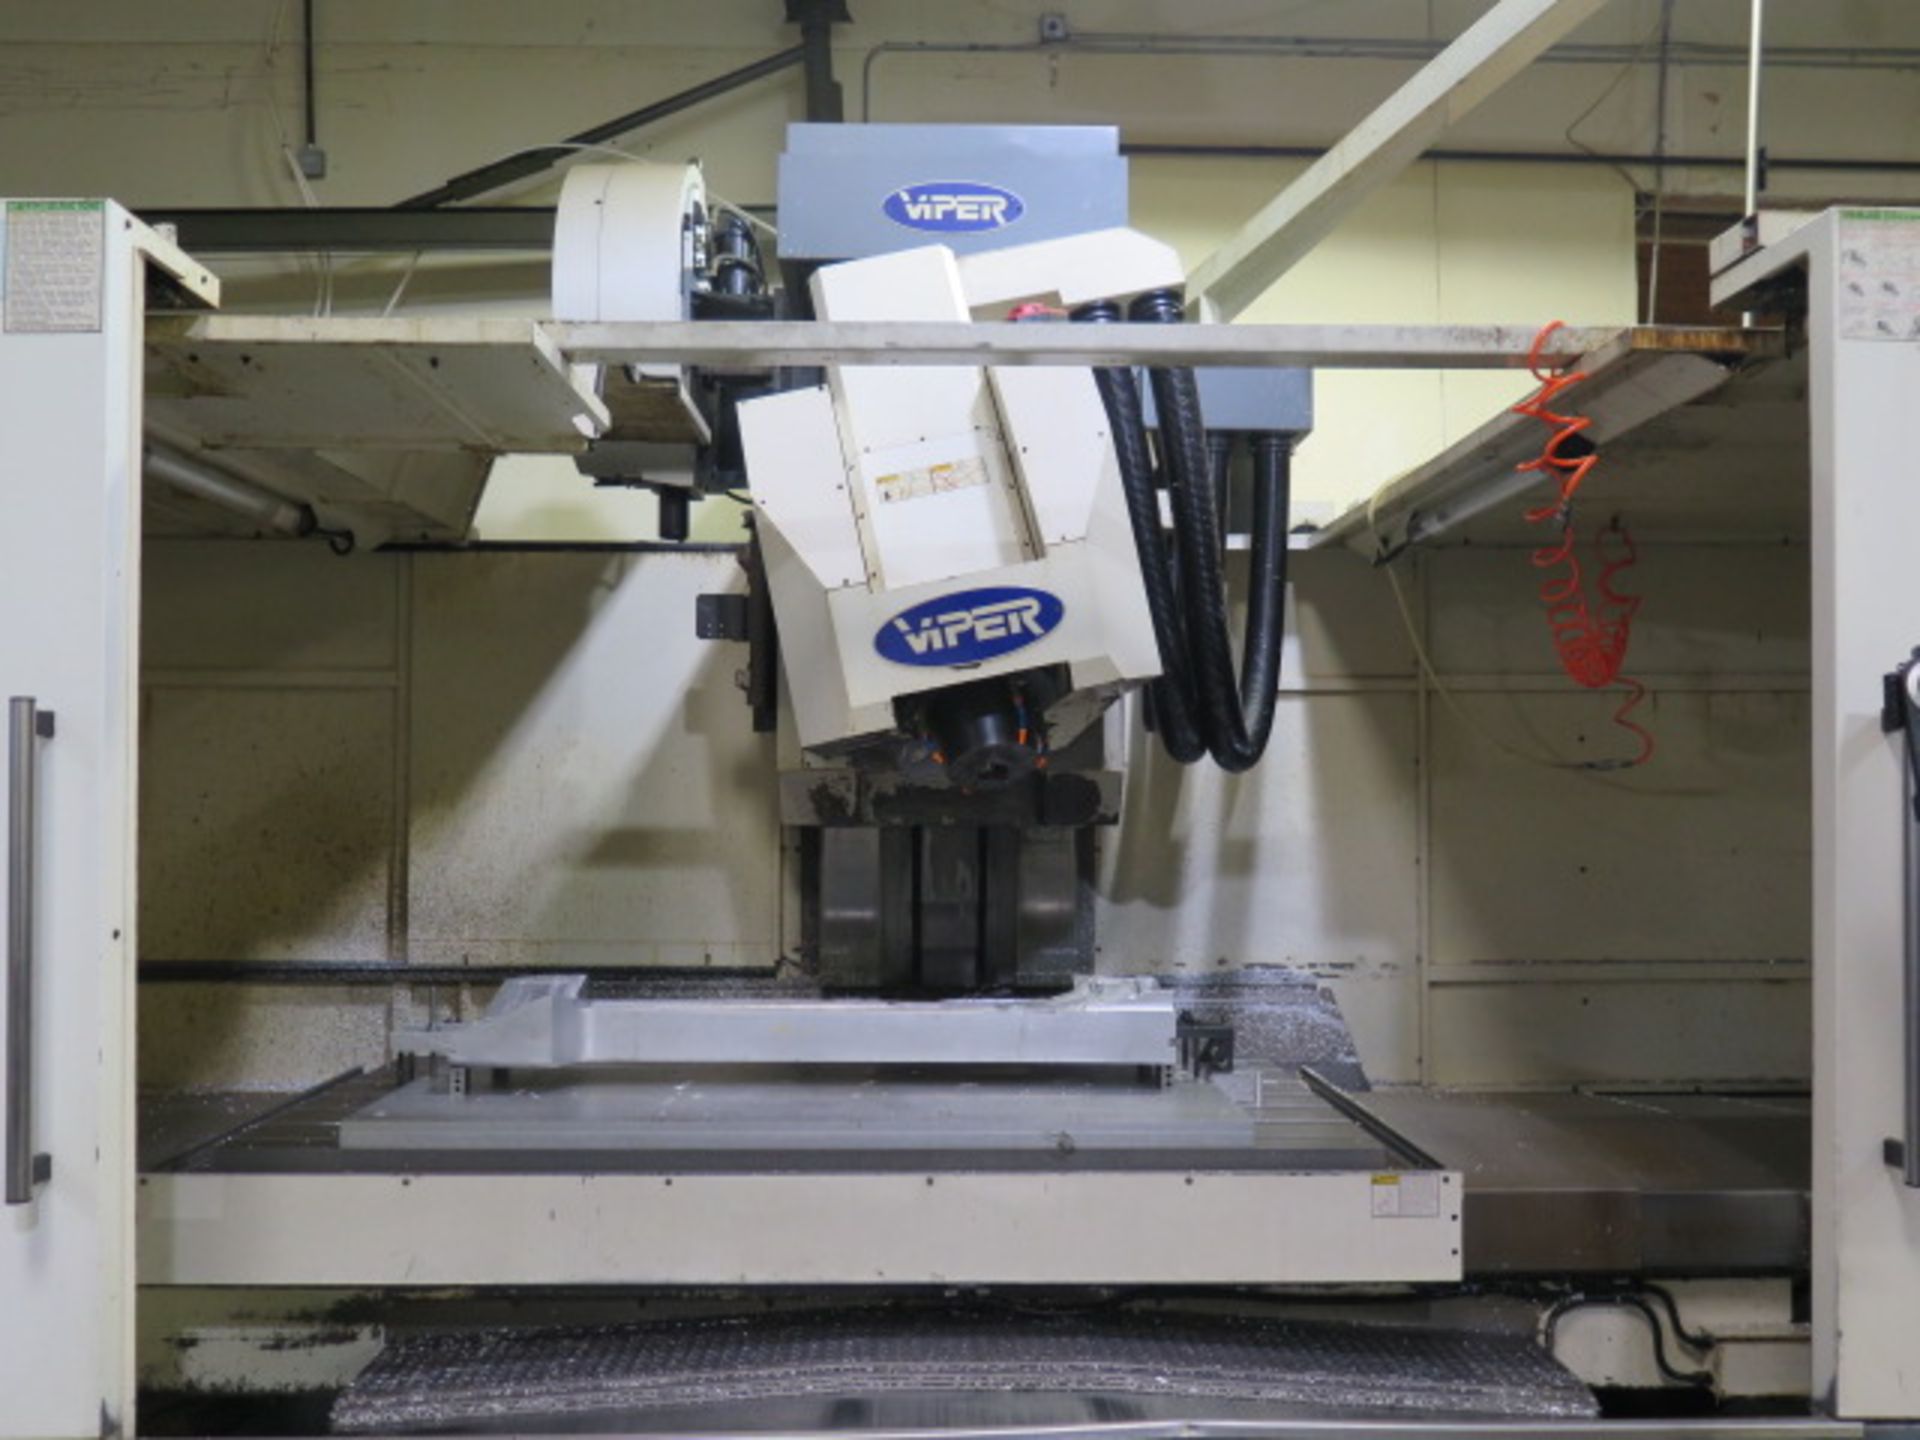 2010 Mighty Viper VMC-2100 5AB True 5-Axis CNC VMC, s/n 011795 w/ Fanuc 30i MODEL A, SOLD AS IS - Image 4 of 26